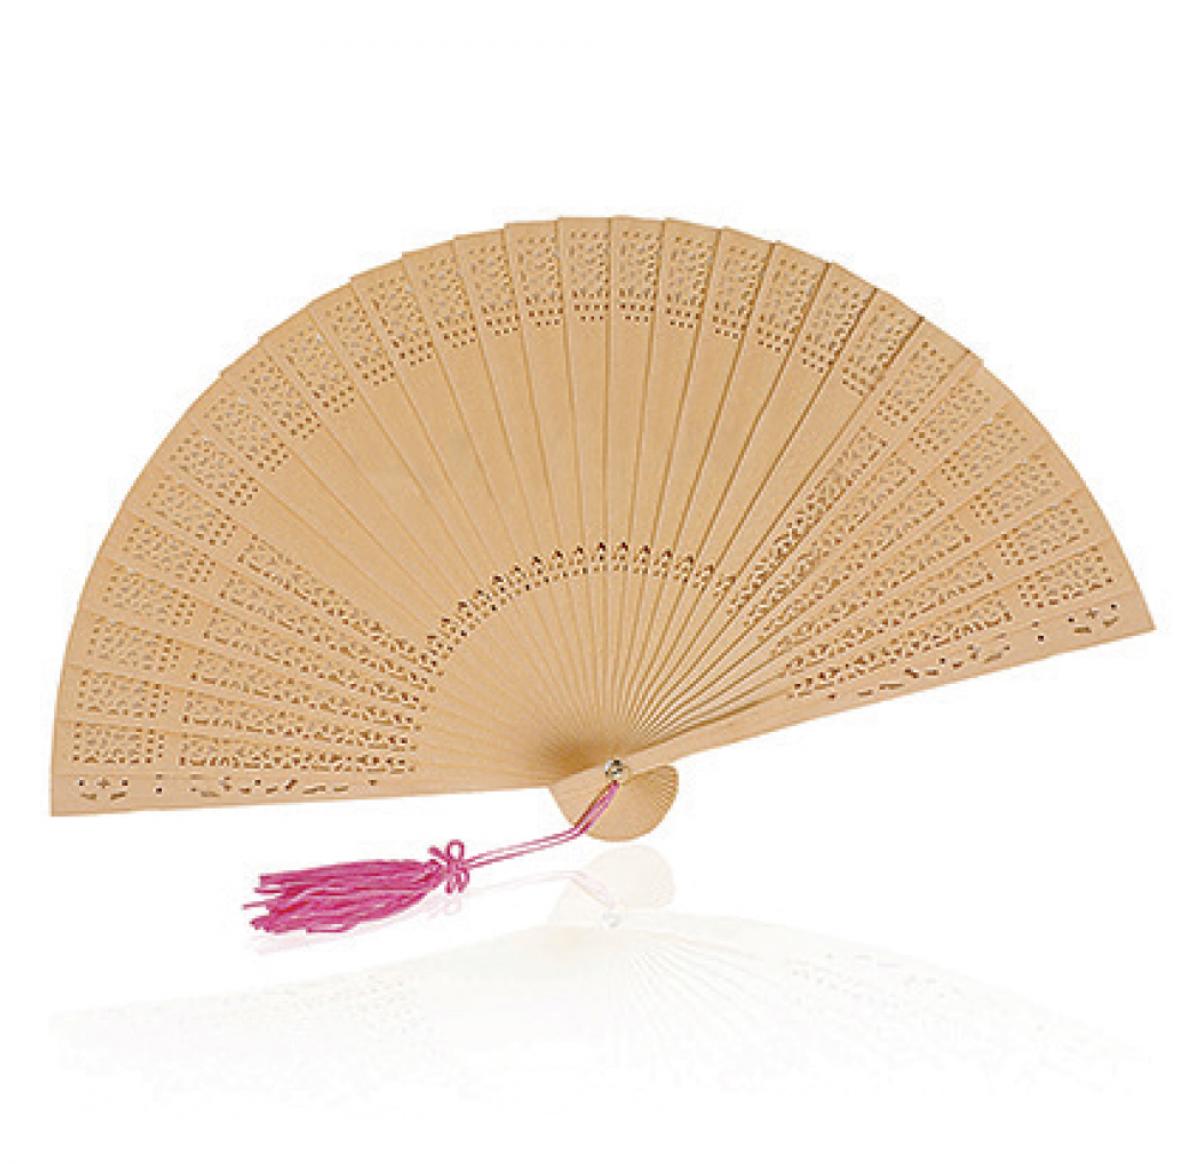 Wooden Hand Held Foldable Fan Madera